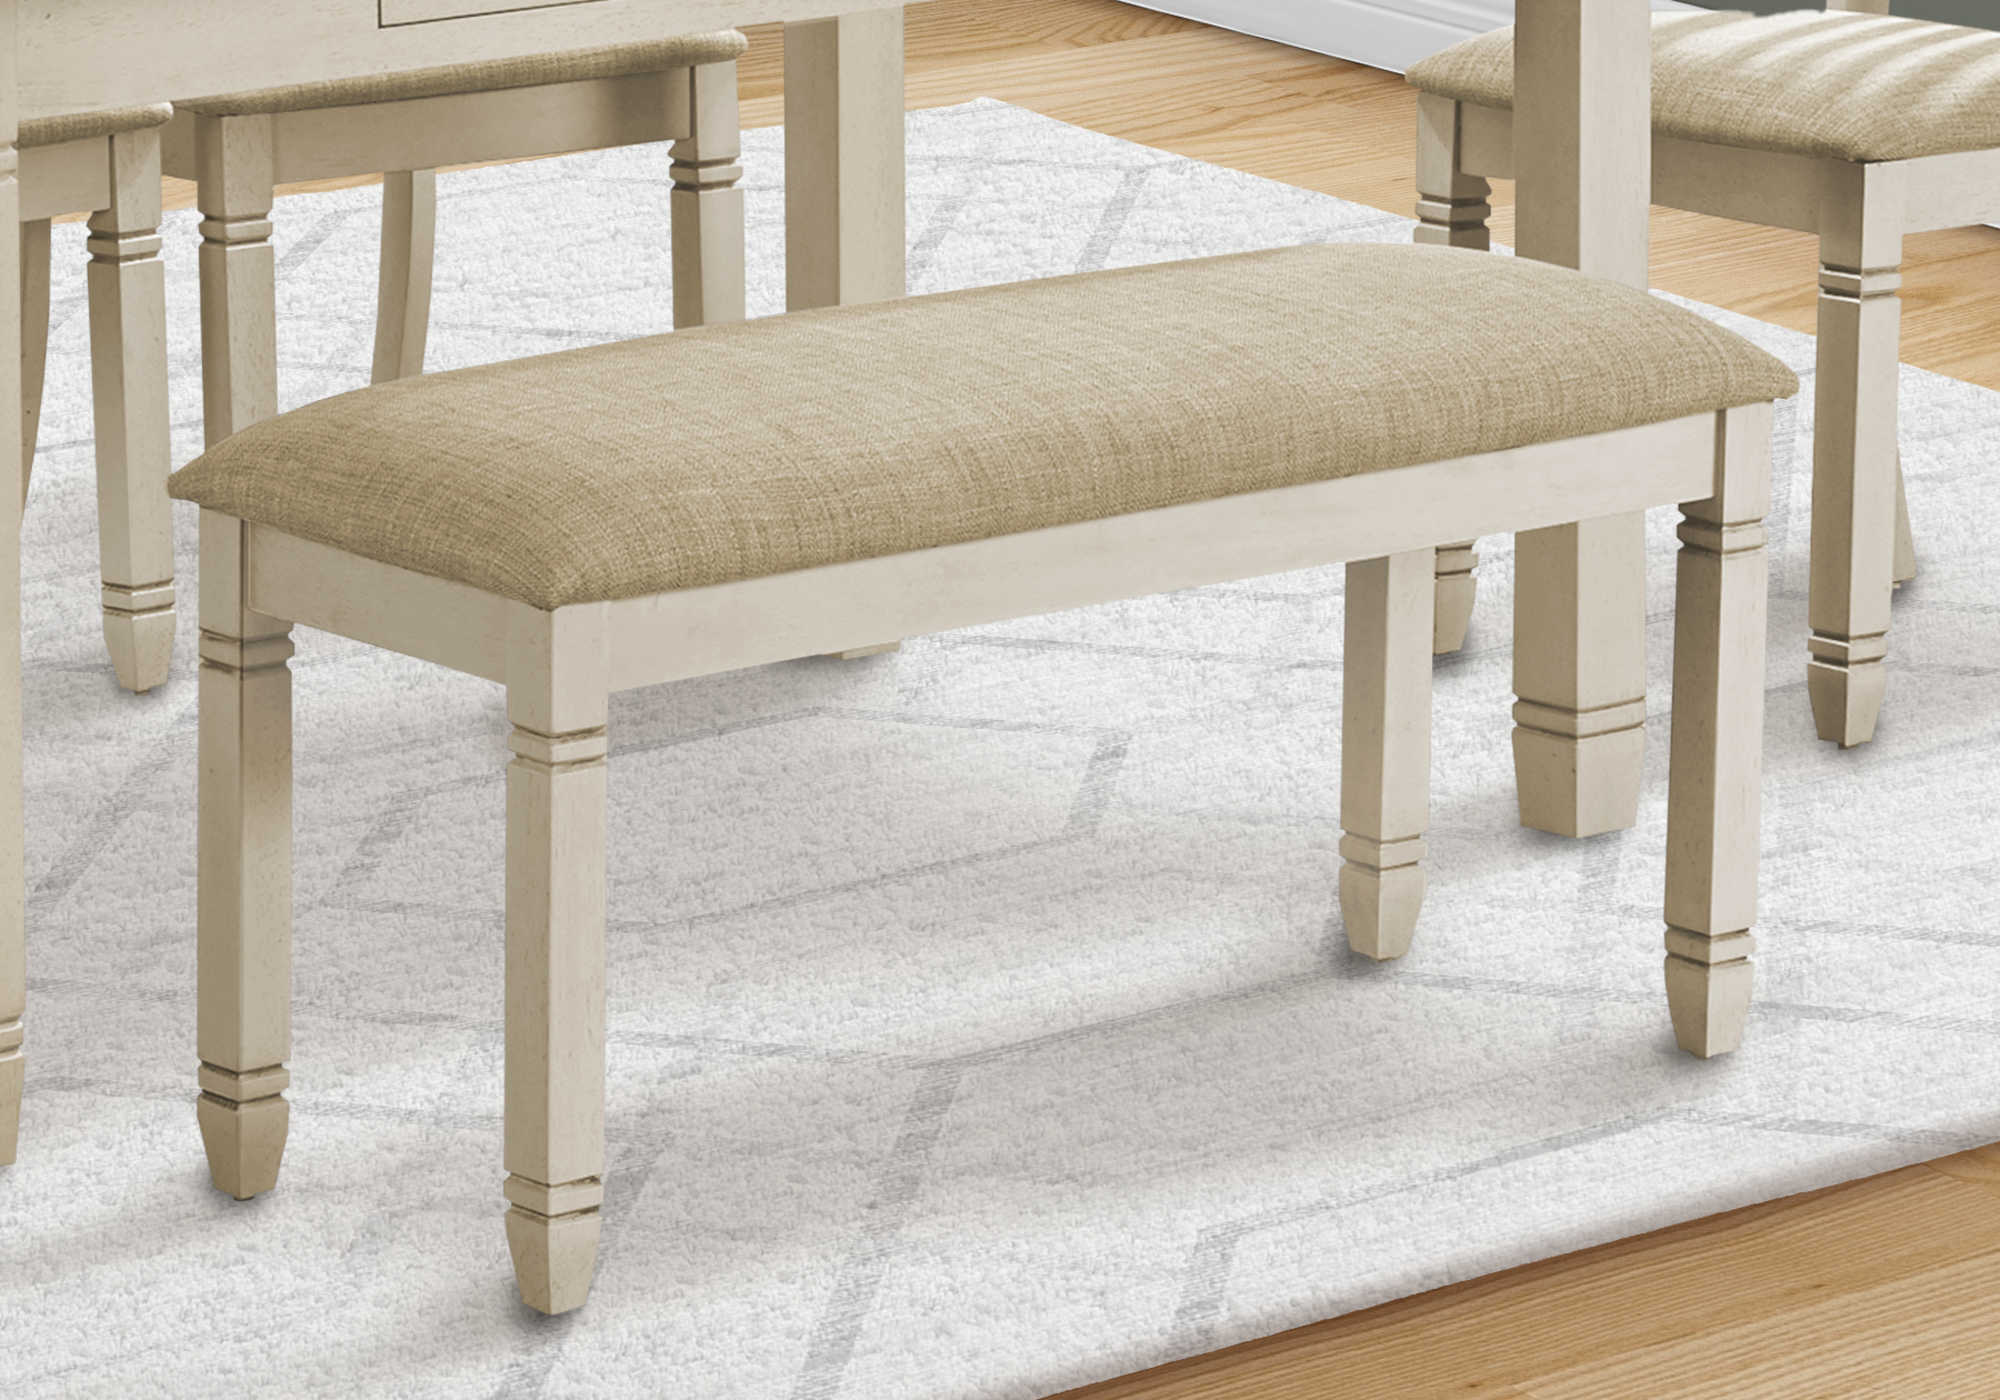 BENCH - 41"L / UPHOLSTERED BEIGE FABRIC